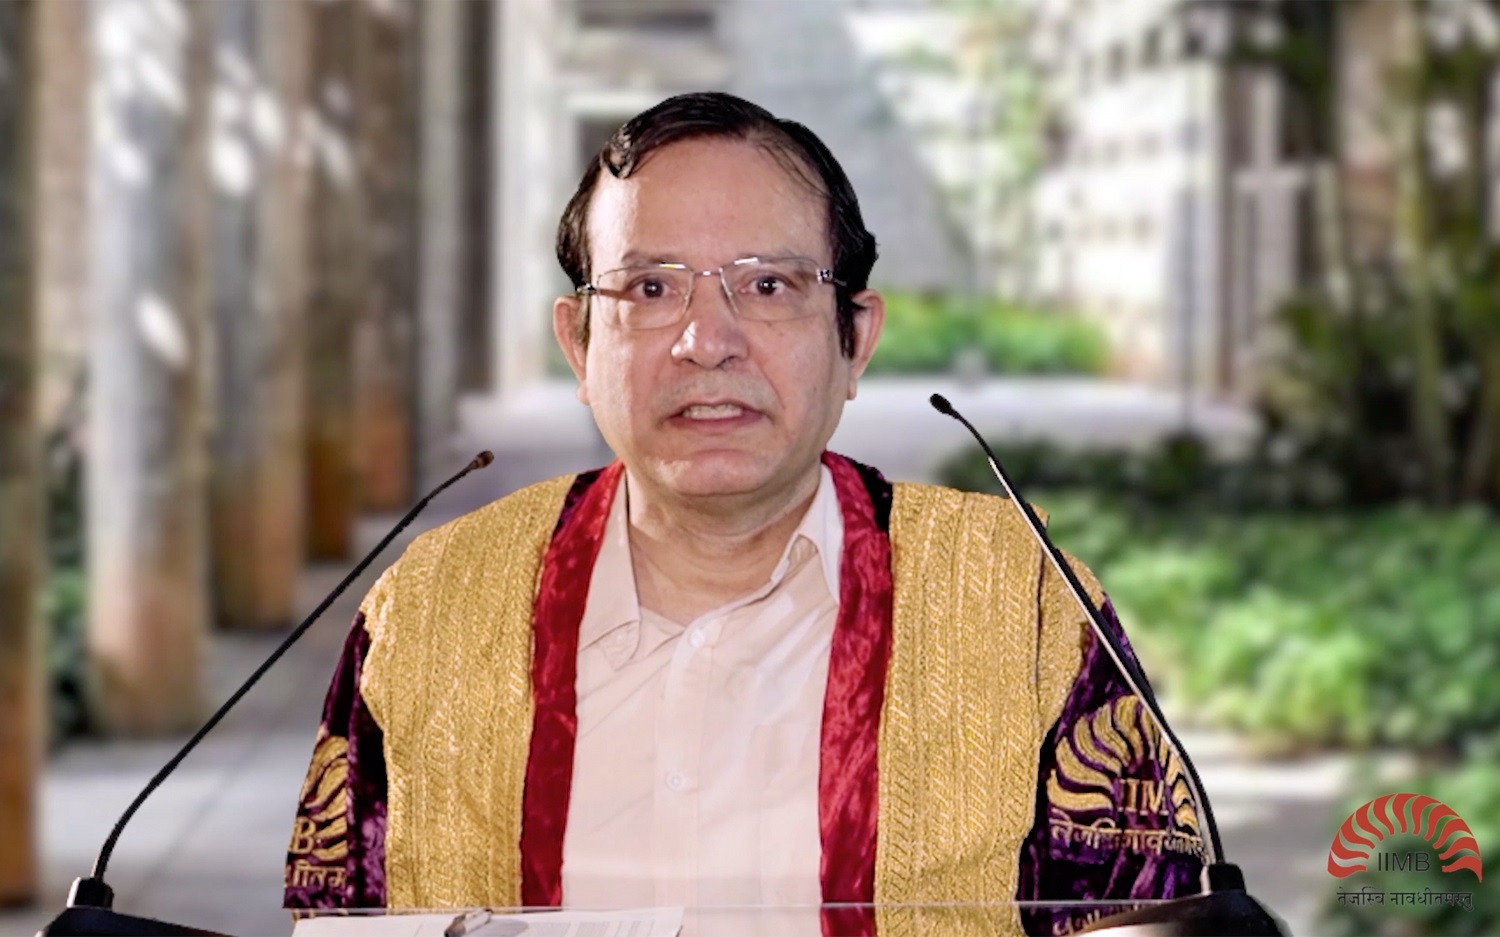 Professor Gopal Mahapatra, Chairperson, Post Graduate Programme in Enterprise Management (PGPEM), announces the list of graduating students virtually at the 46th Convocation.